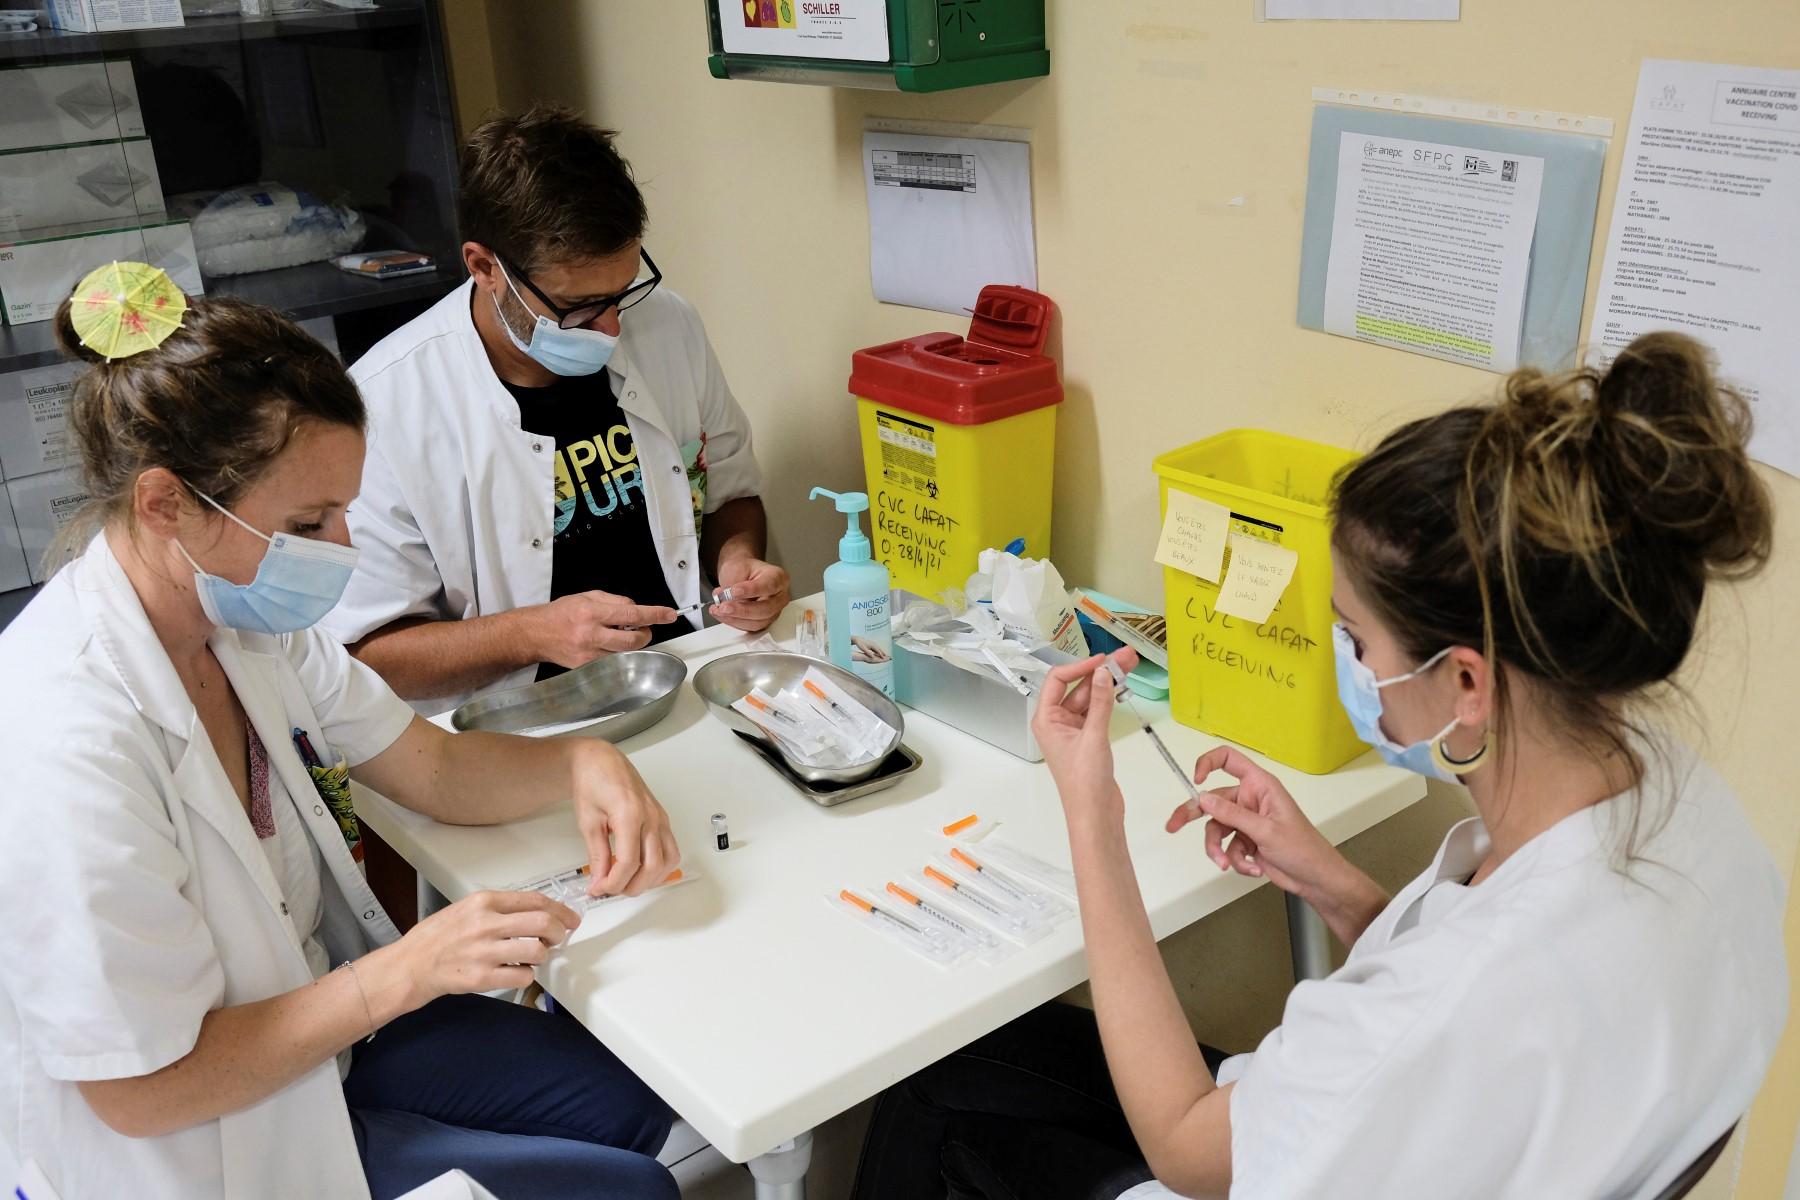 Nurses prepare doses of the Comirnaty vaccine by Pfizer-BioNTech against Covid-19 in a vaccination centre in Noumea, in the French Pacific territory of New Caledonia, on Sept 7. Photo: AFP